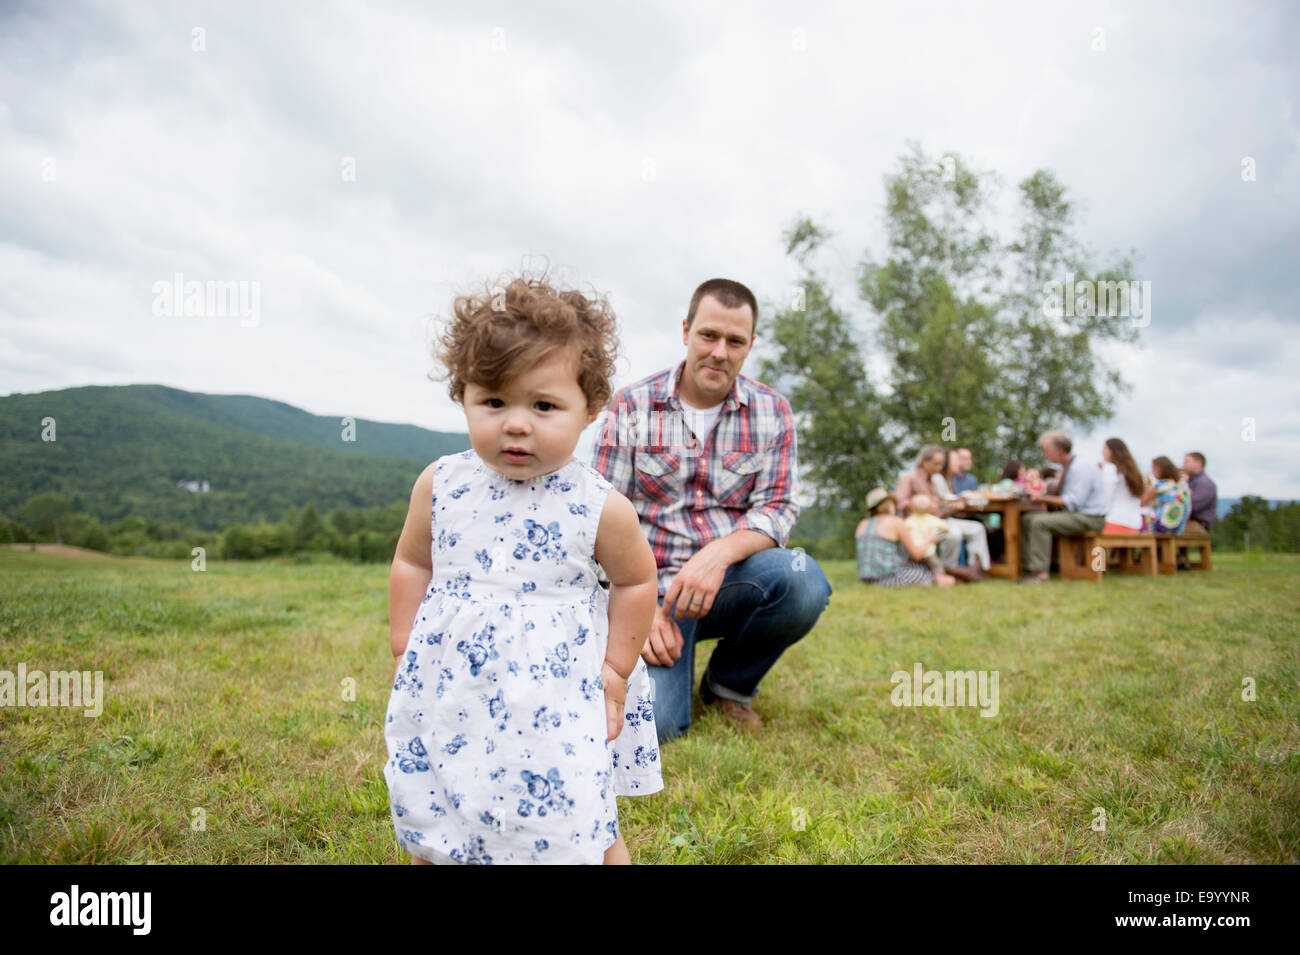 Father playing with daughter at family gathering, outdoors Stock Photo